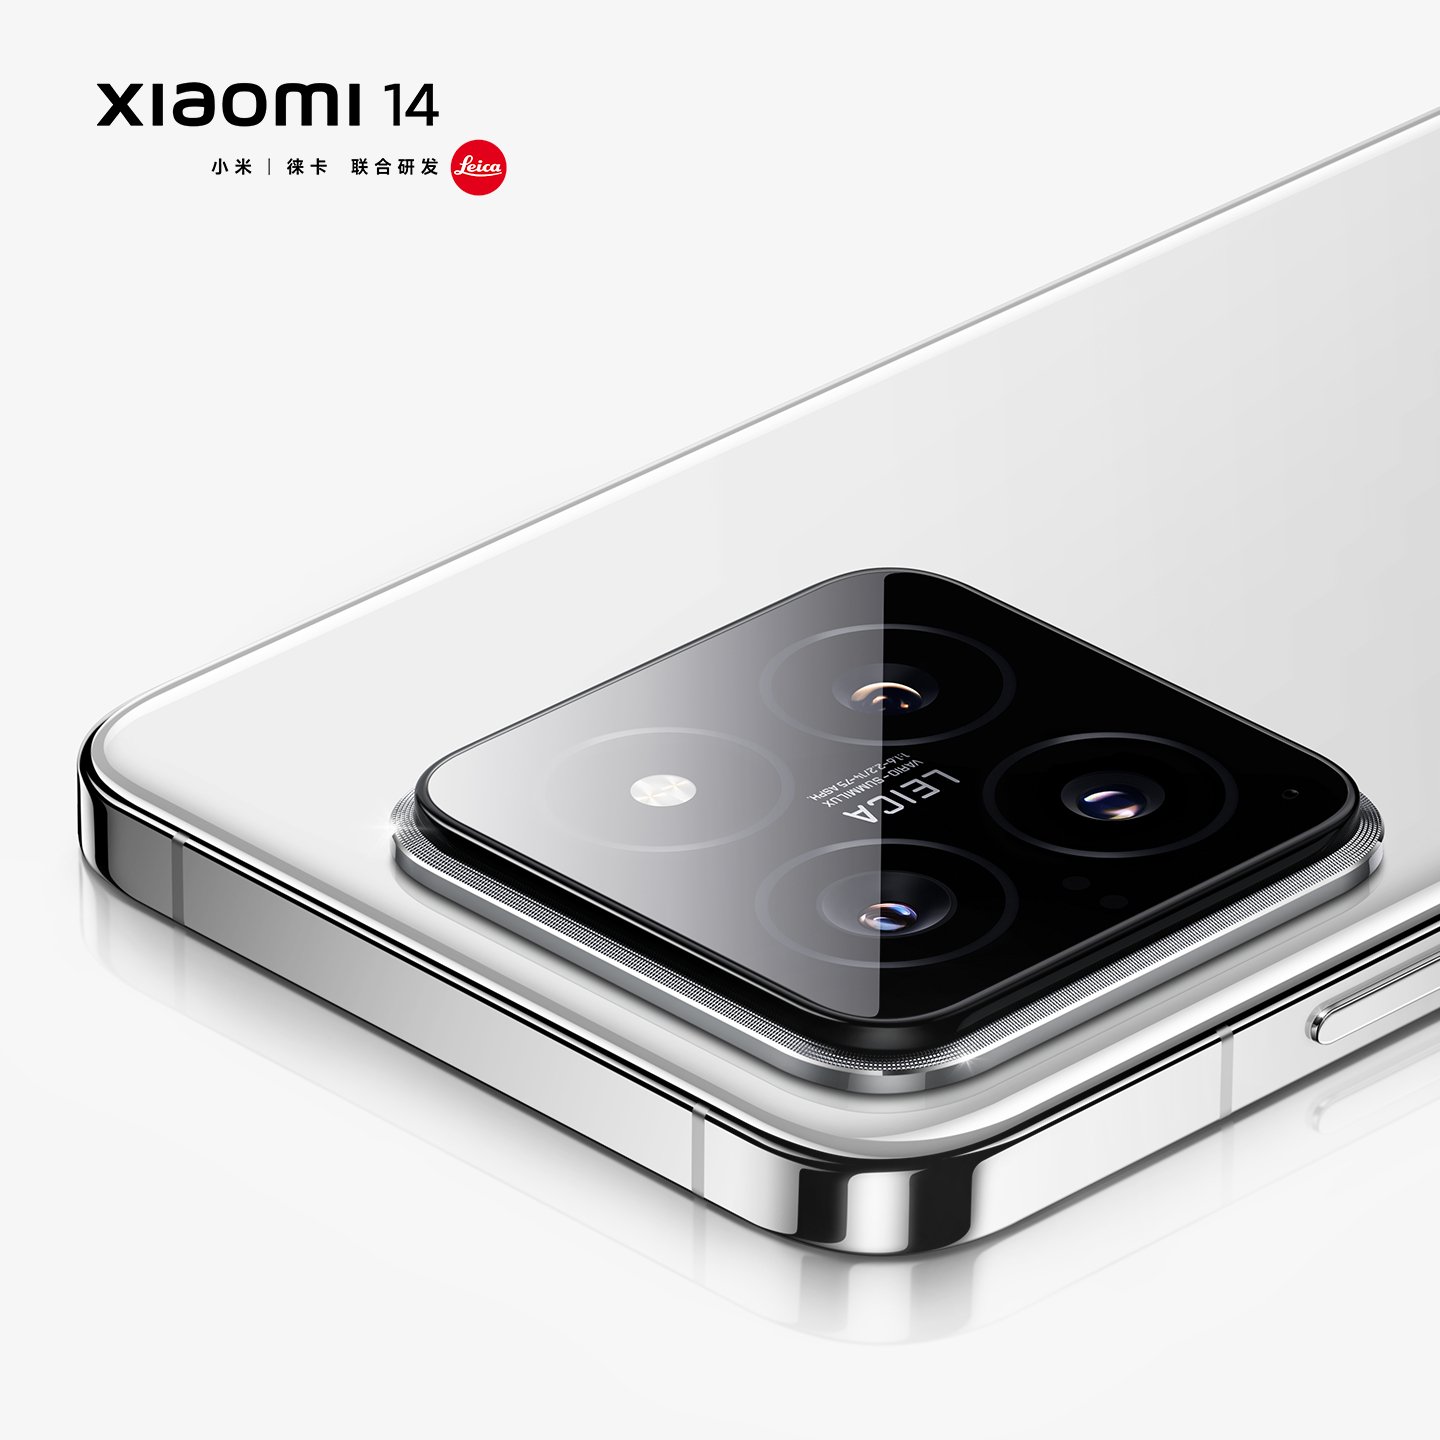 Xiaomi 14 to launch with thinner display bezels than Apple iPhone